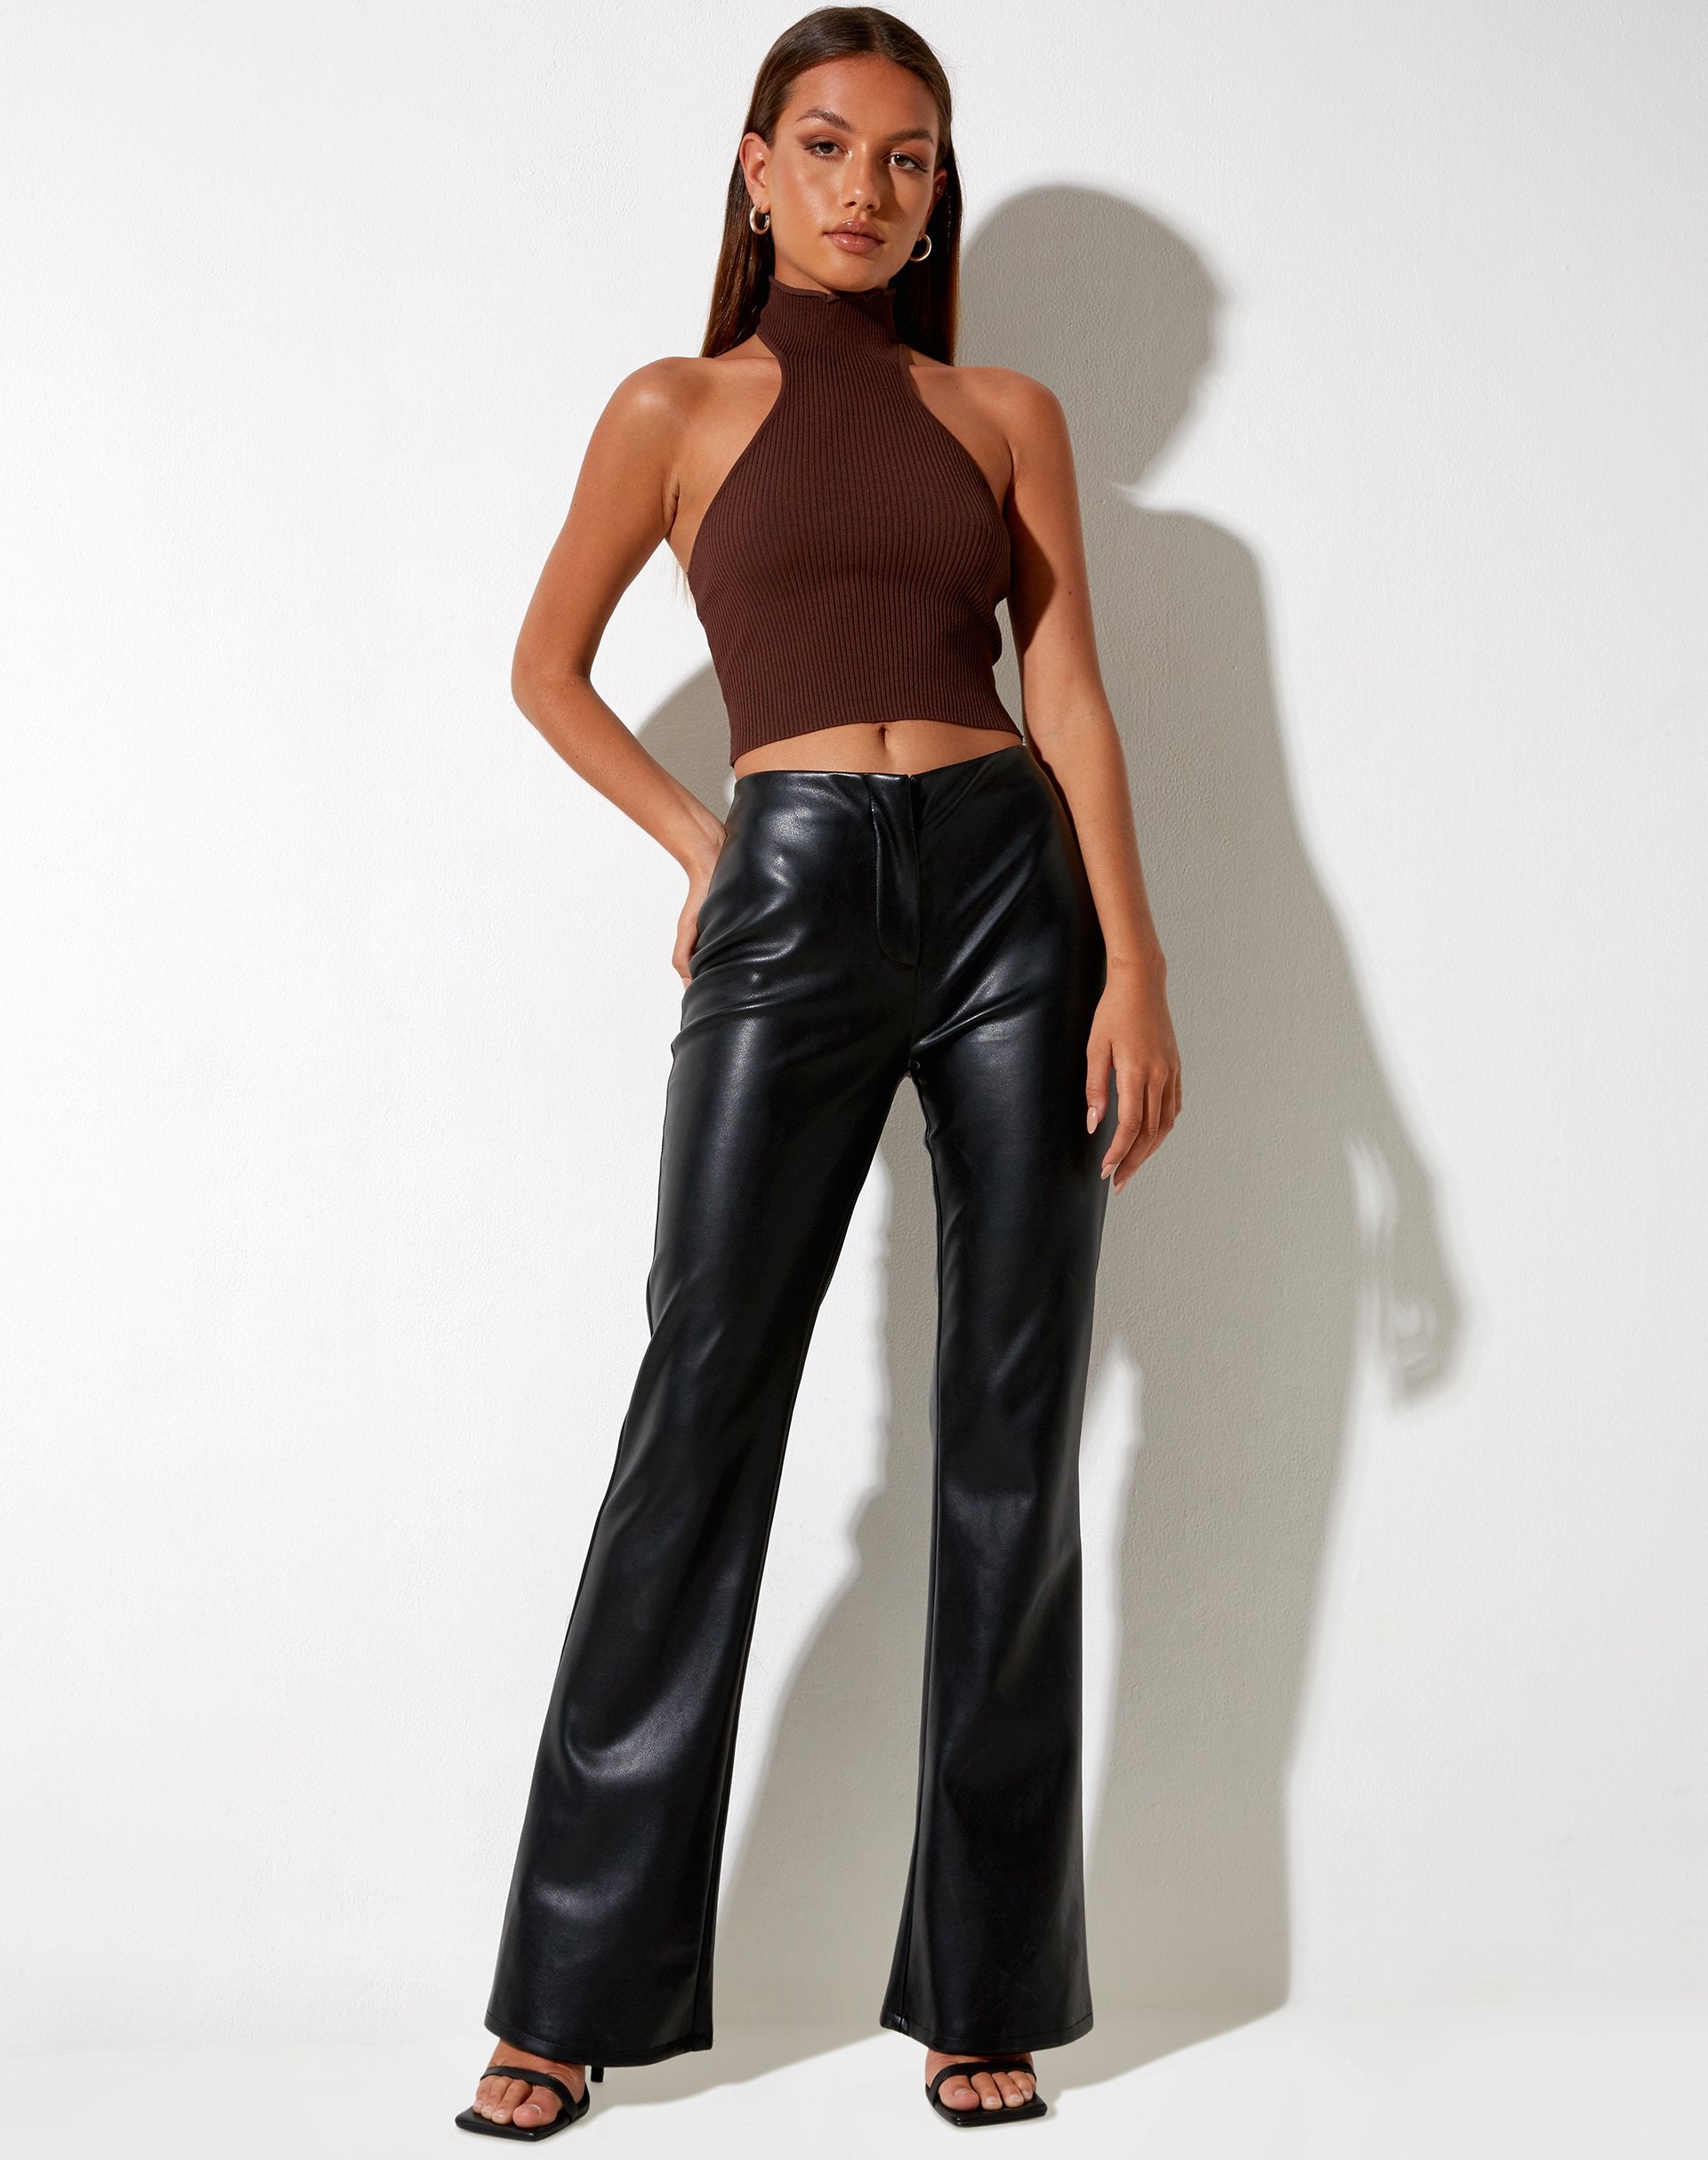 Image of Moila Crop Top in Knit Chocolate